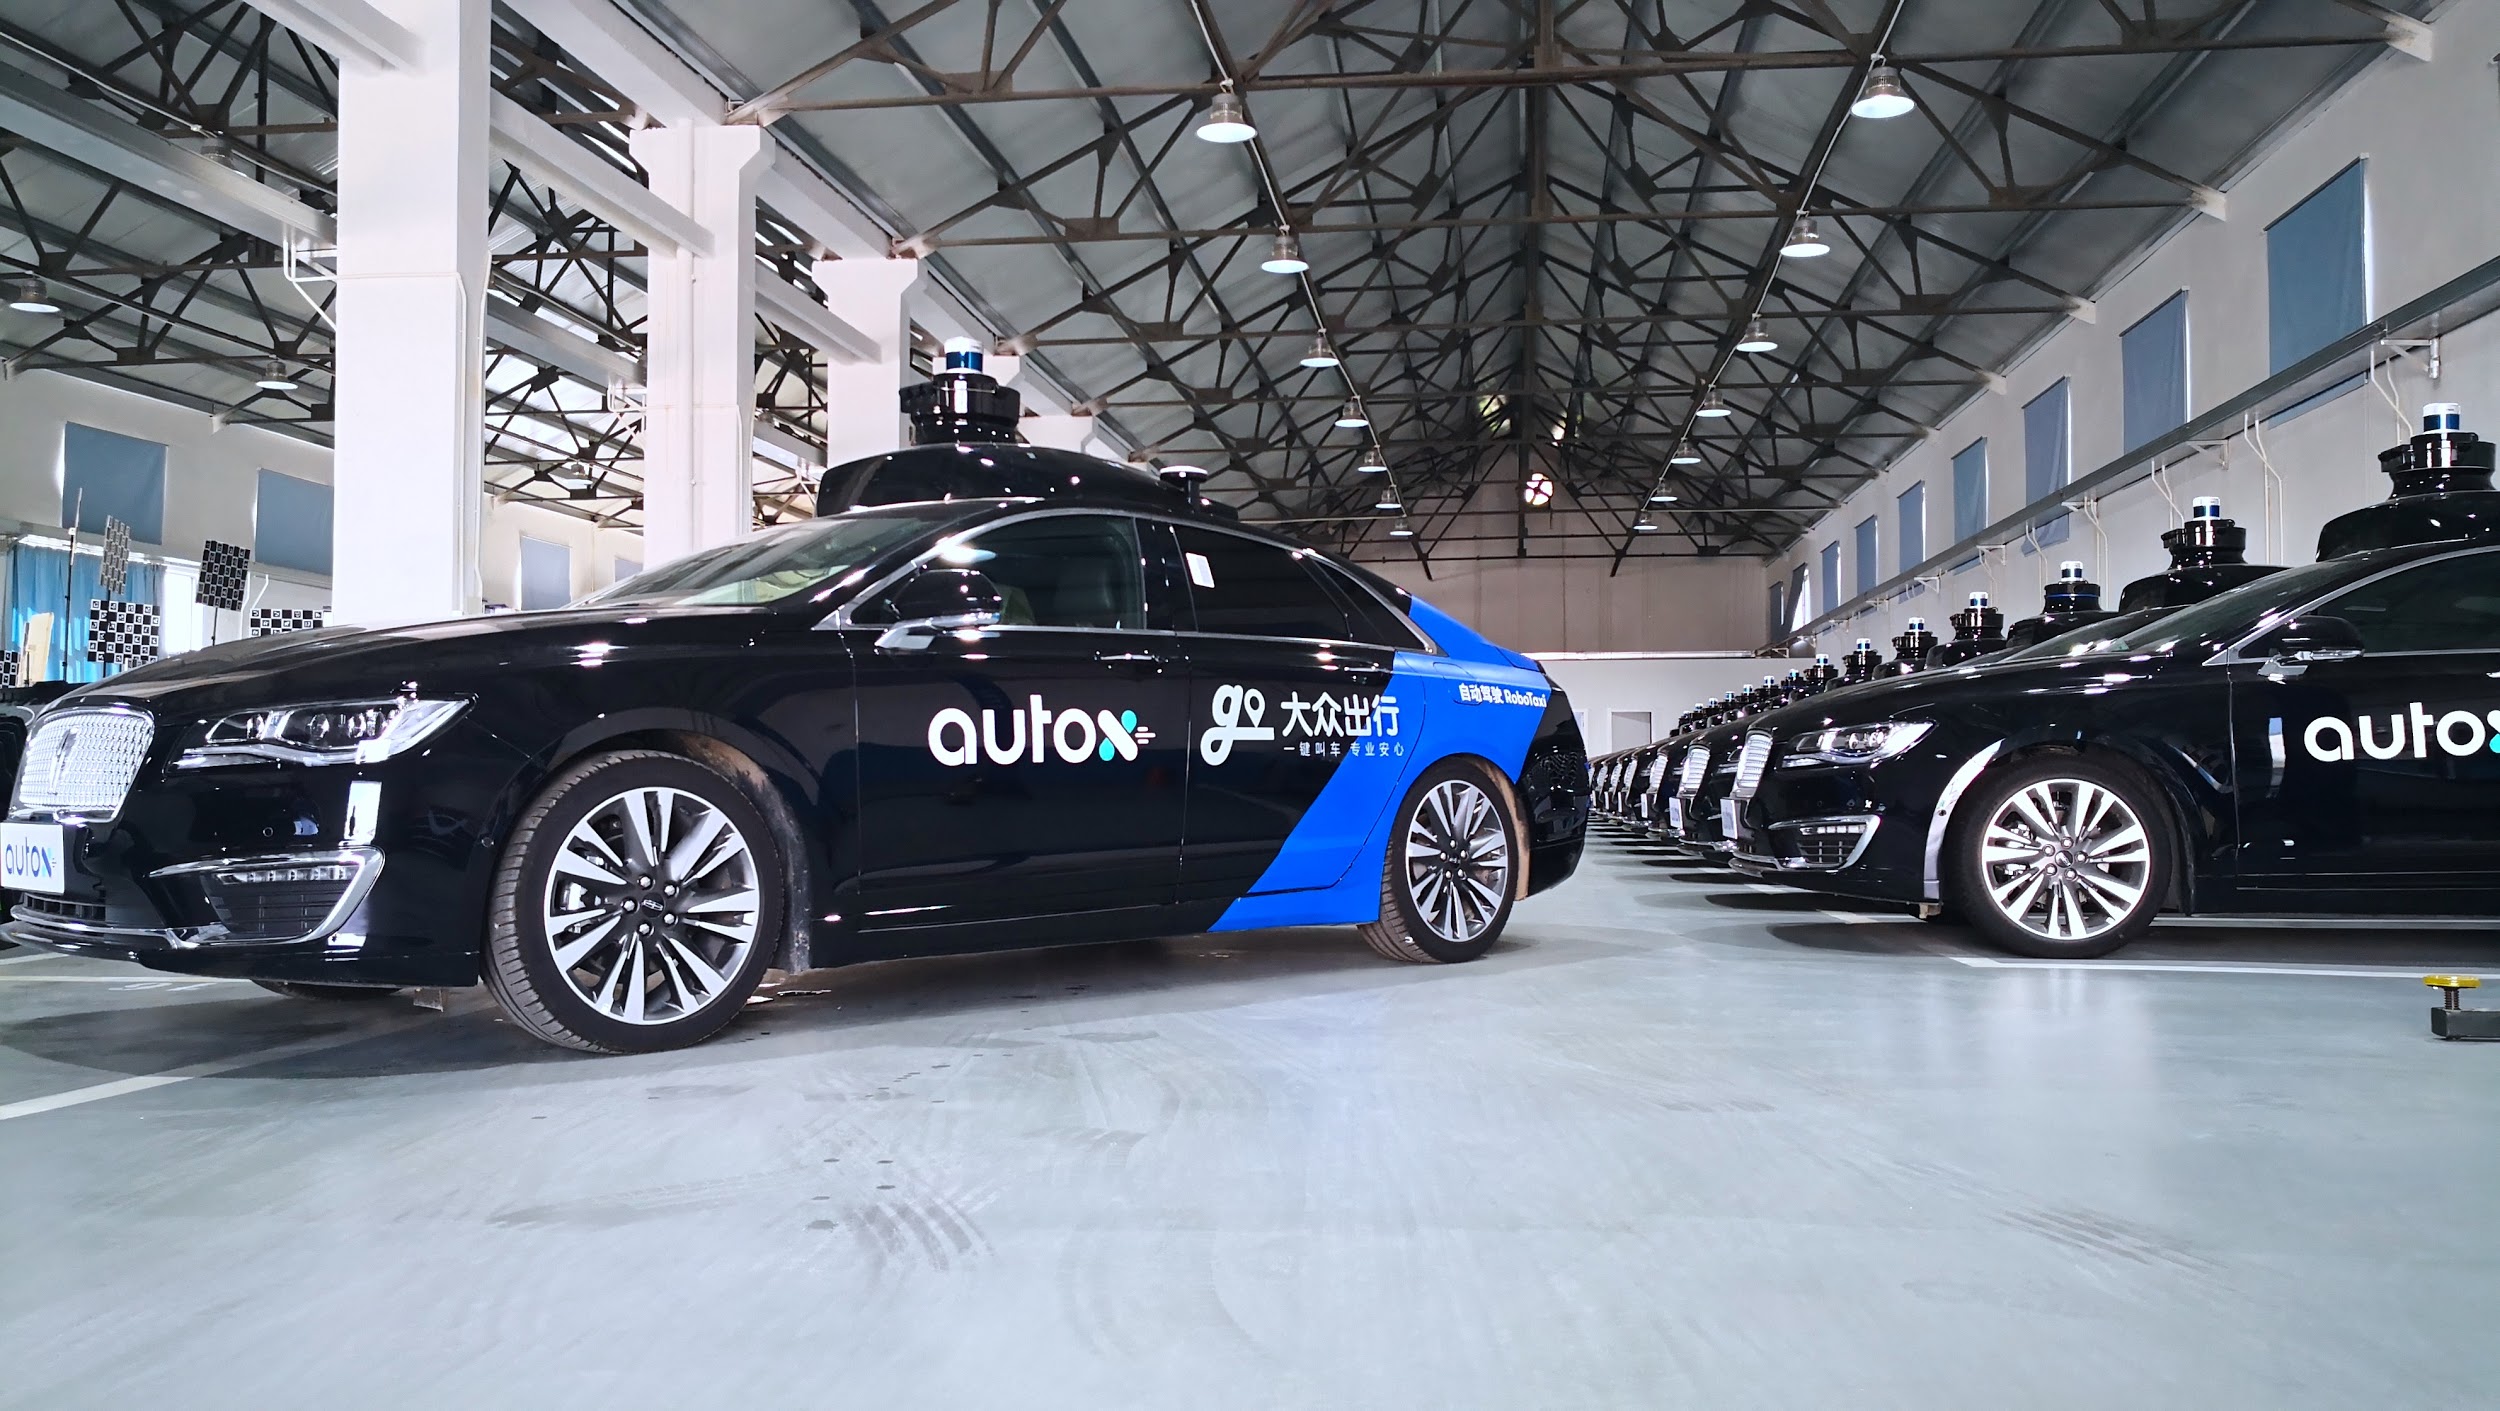 Alibaba-backed AutoX launches driverless robotaxi services to the public